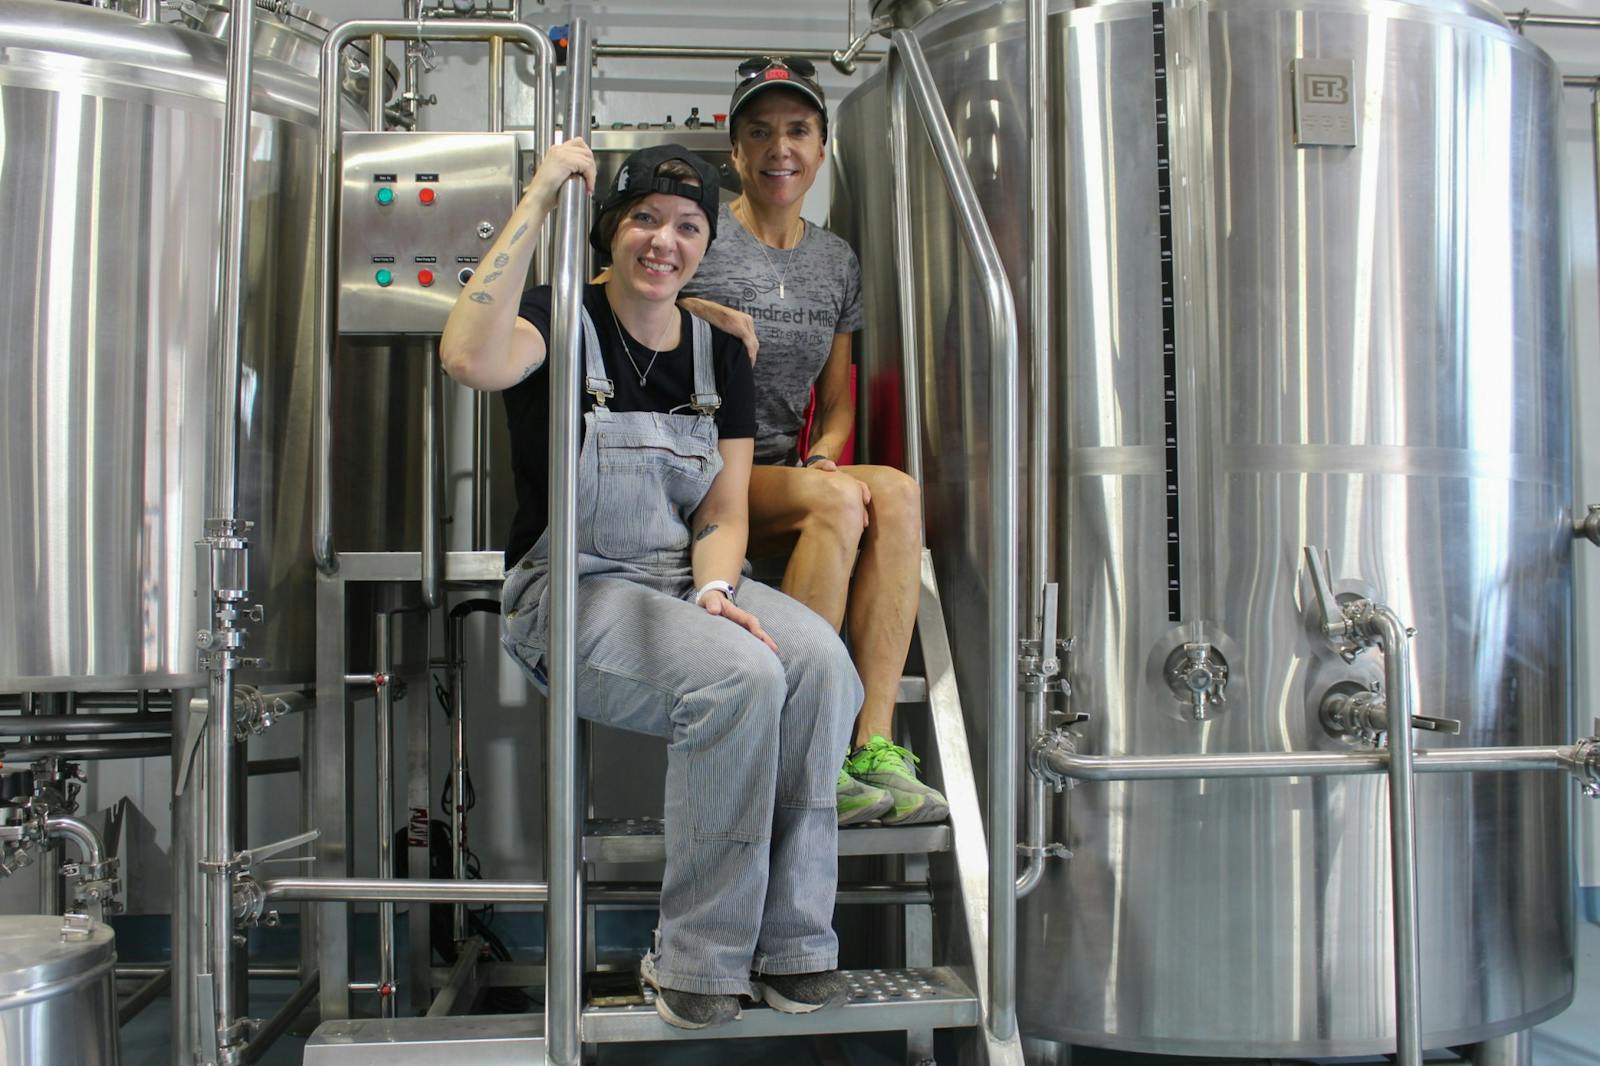 New Tempe brewery founded by ASU alumna to open in fall 2022 The